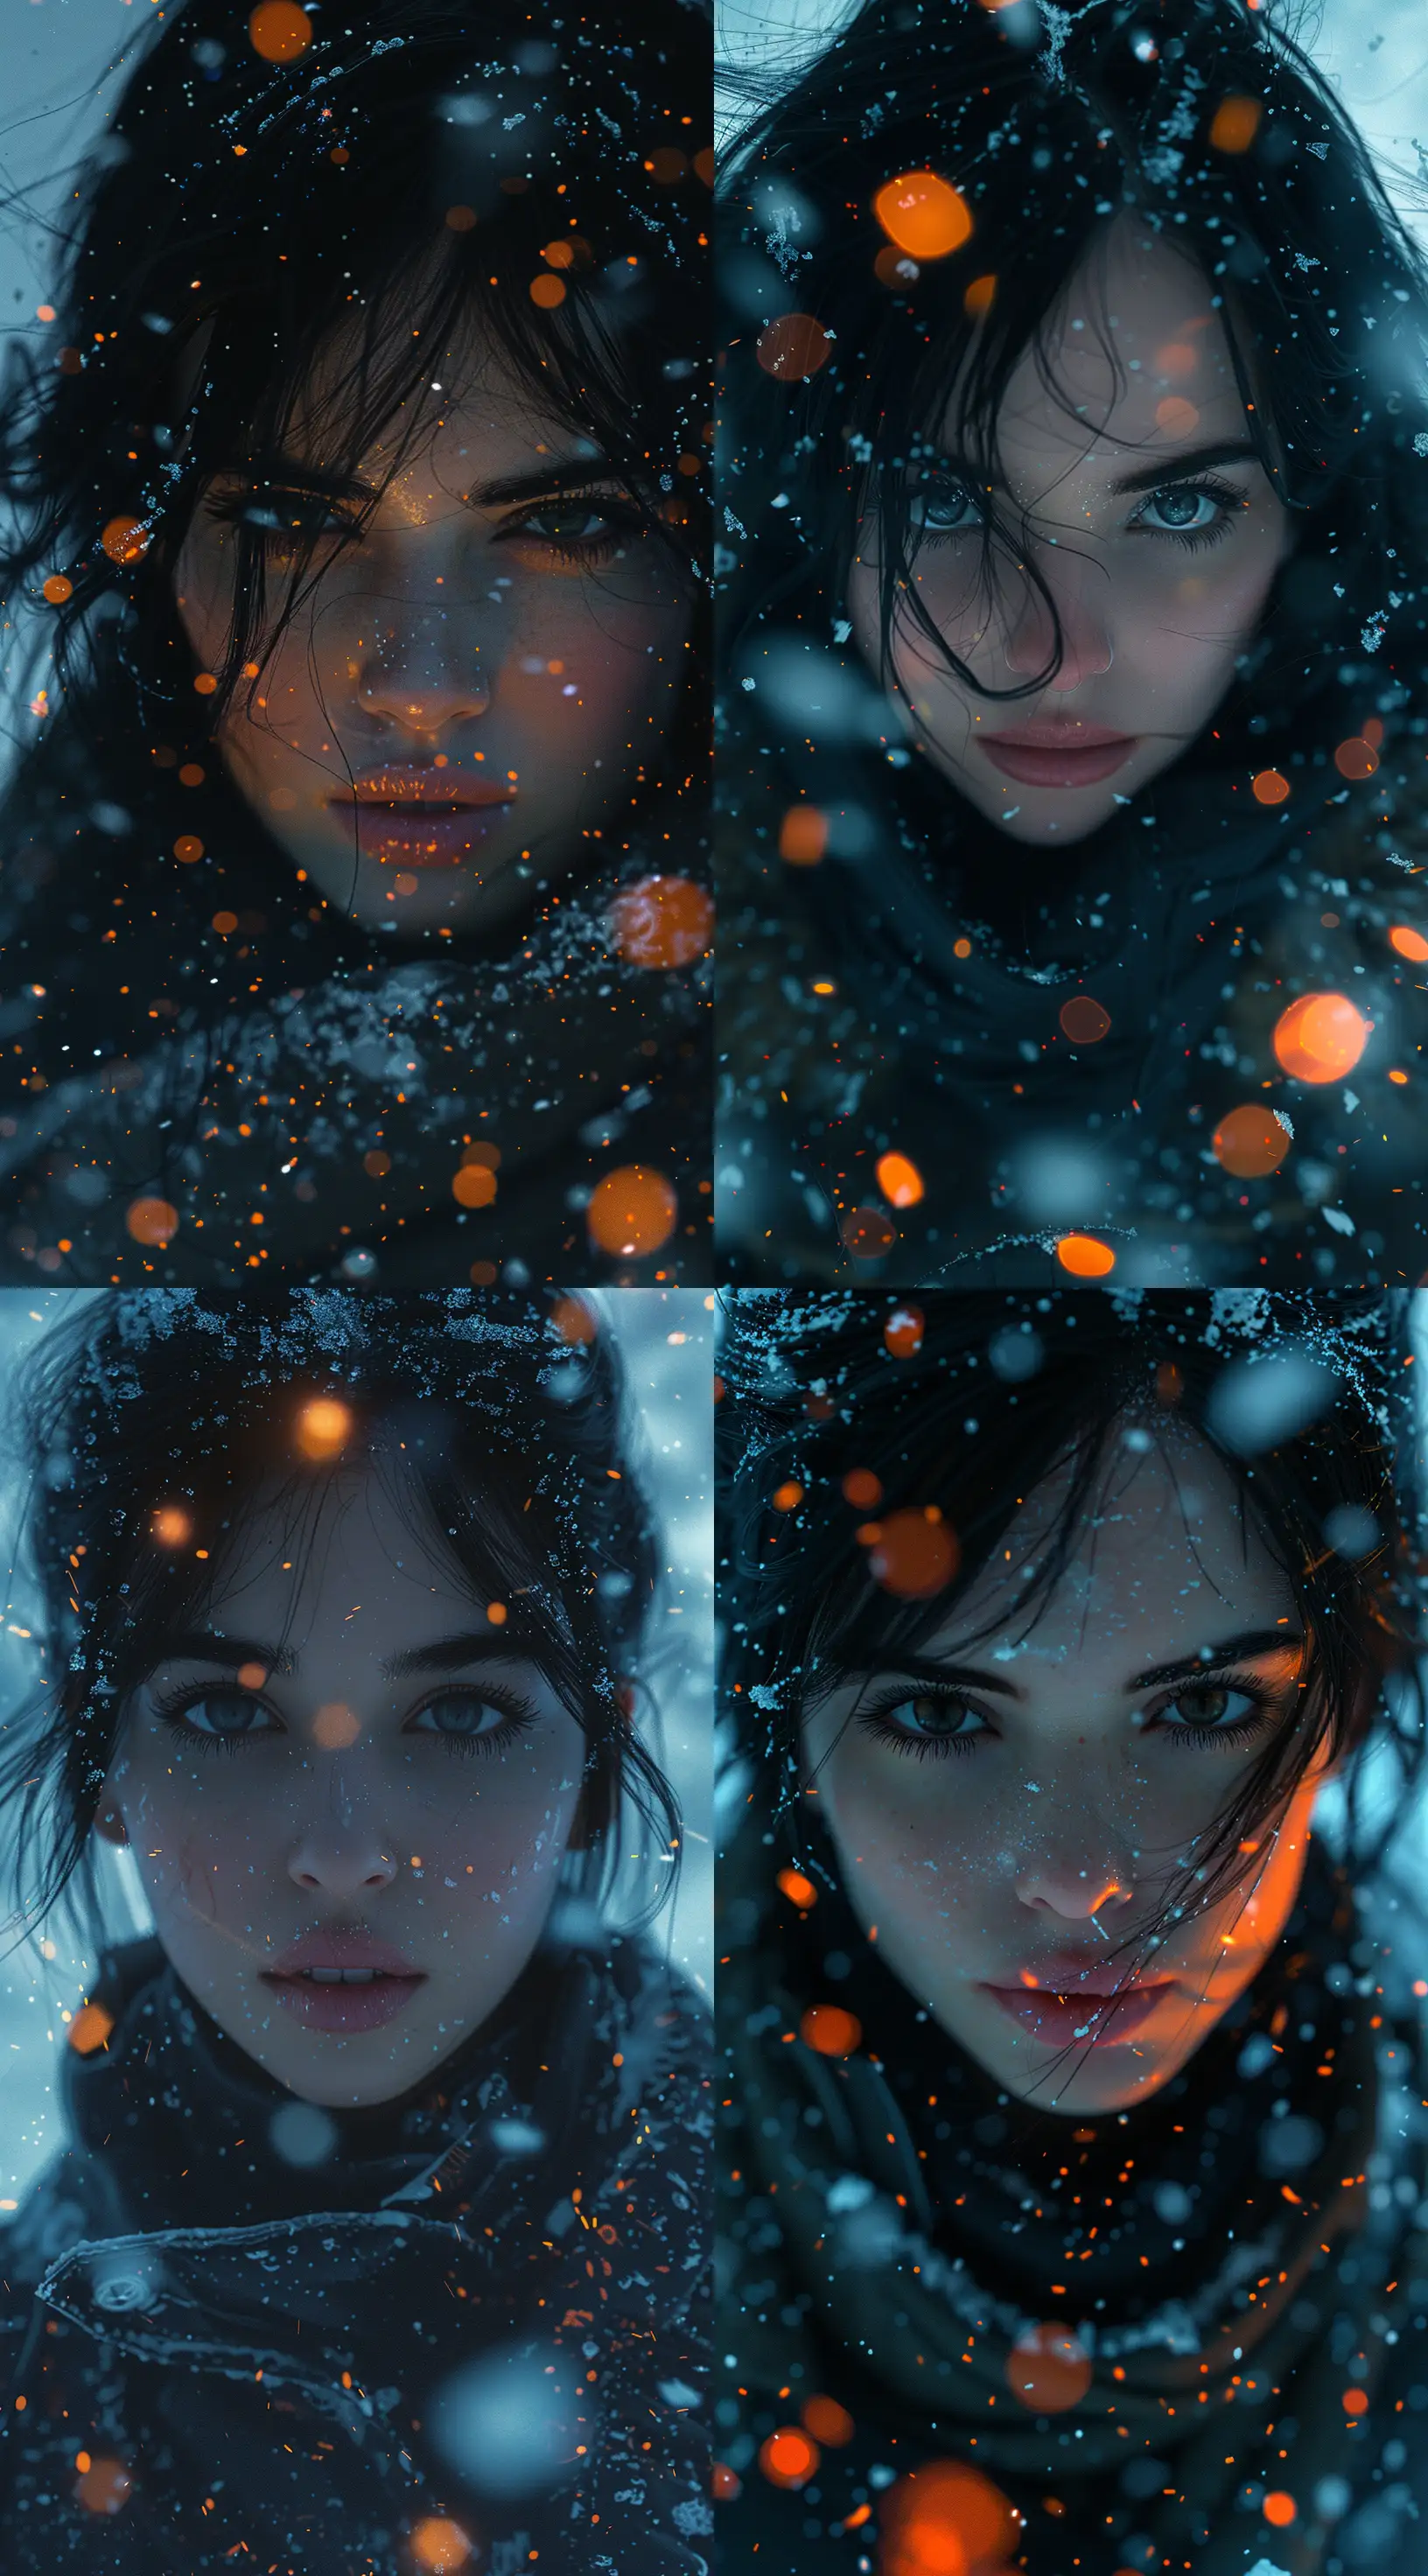 Woman-with-Black-Hair-Standing-in-Snow-Hyperrealistic-Portrait-with-Light-Cyan-and-Orange-Accents